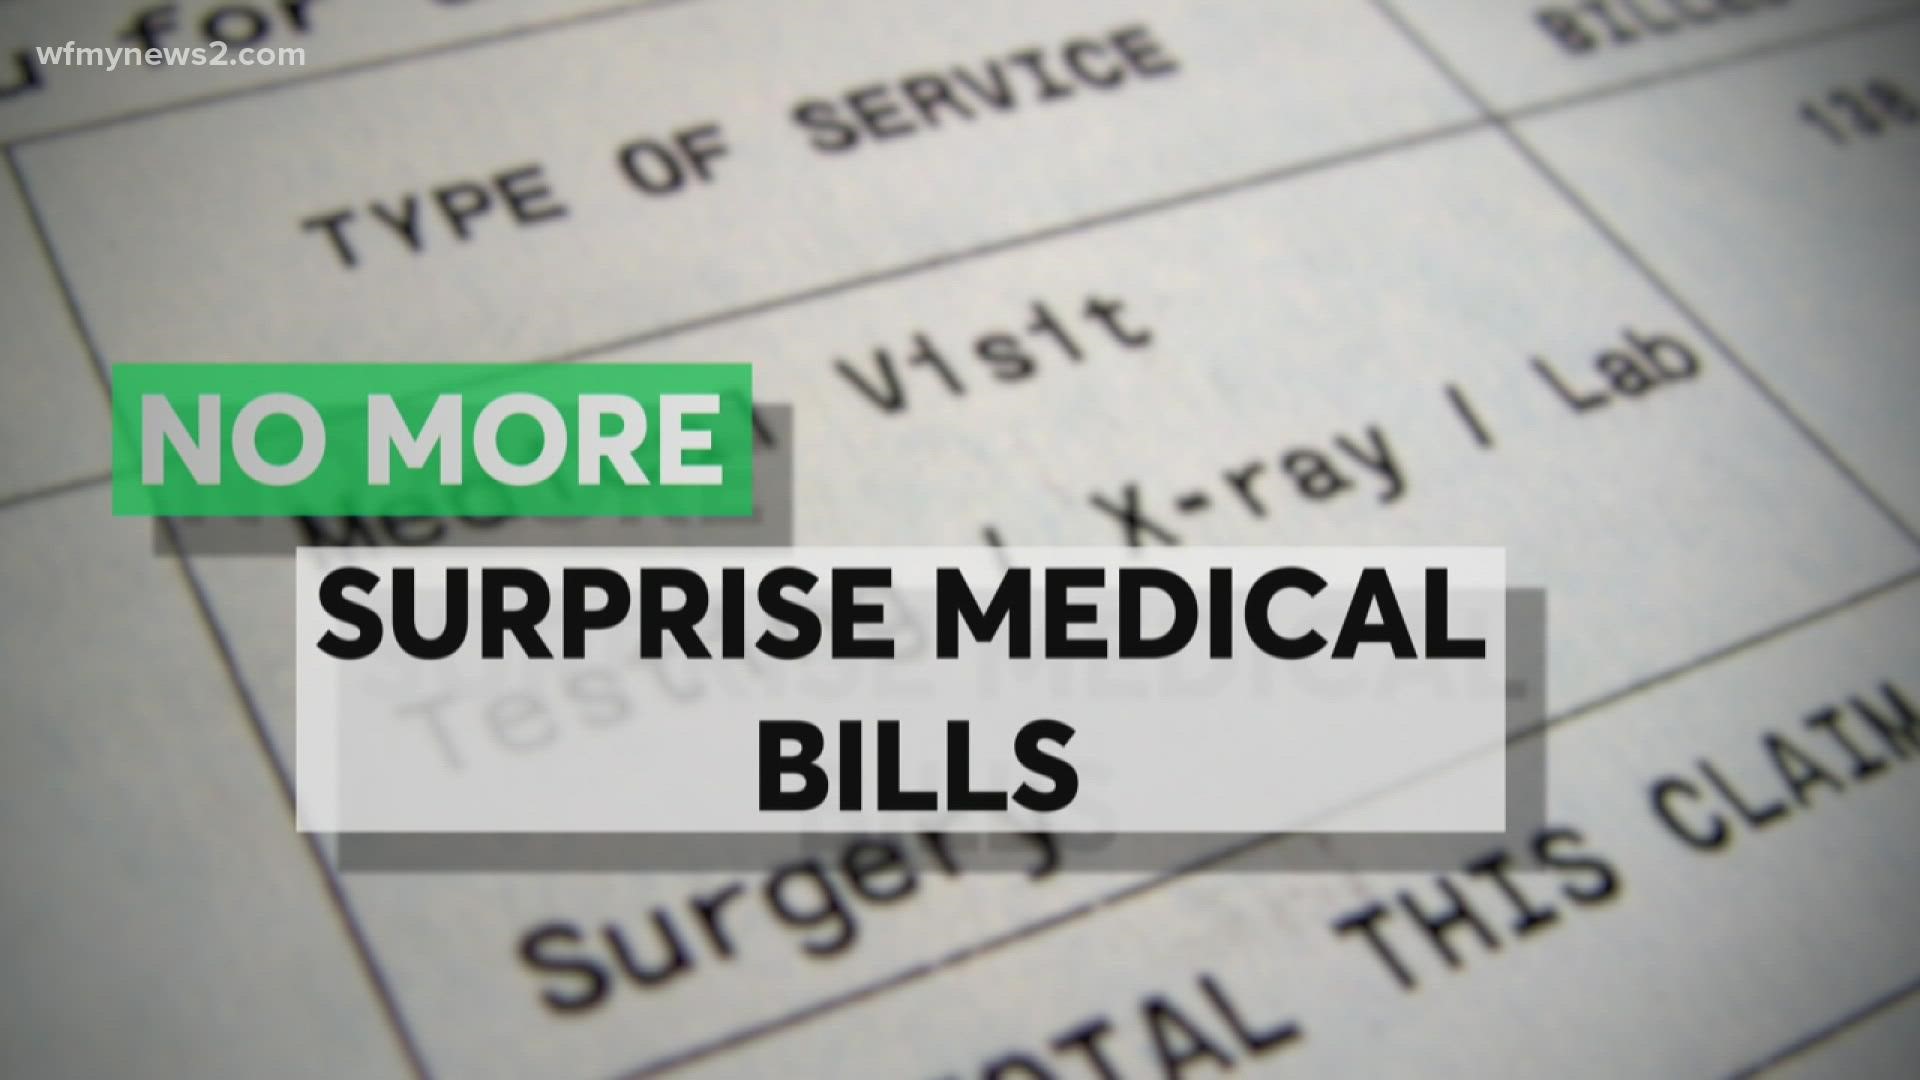 A federal law started protecting consumers from surprise medical bills but it doesn't cover everything.